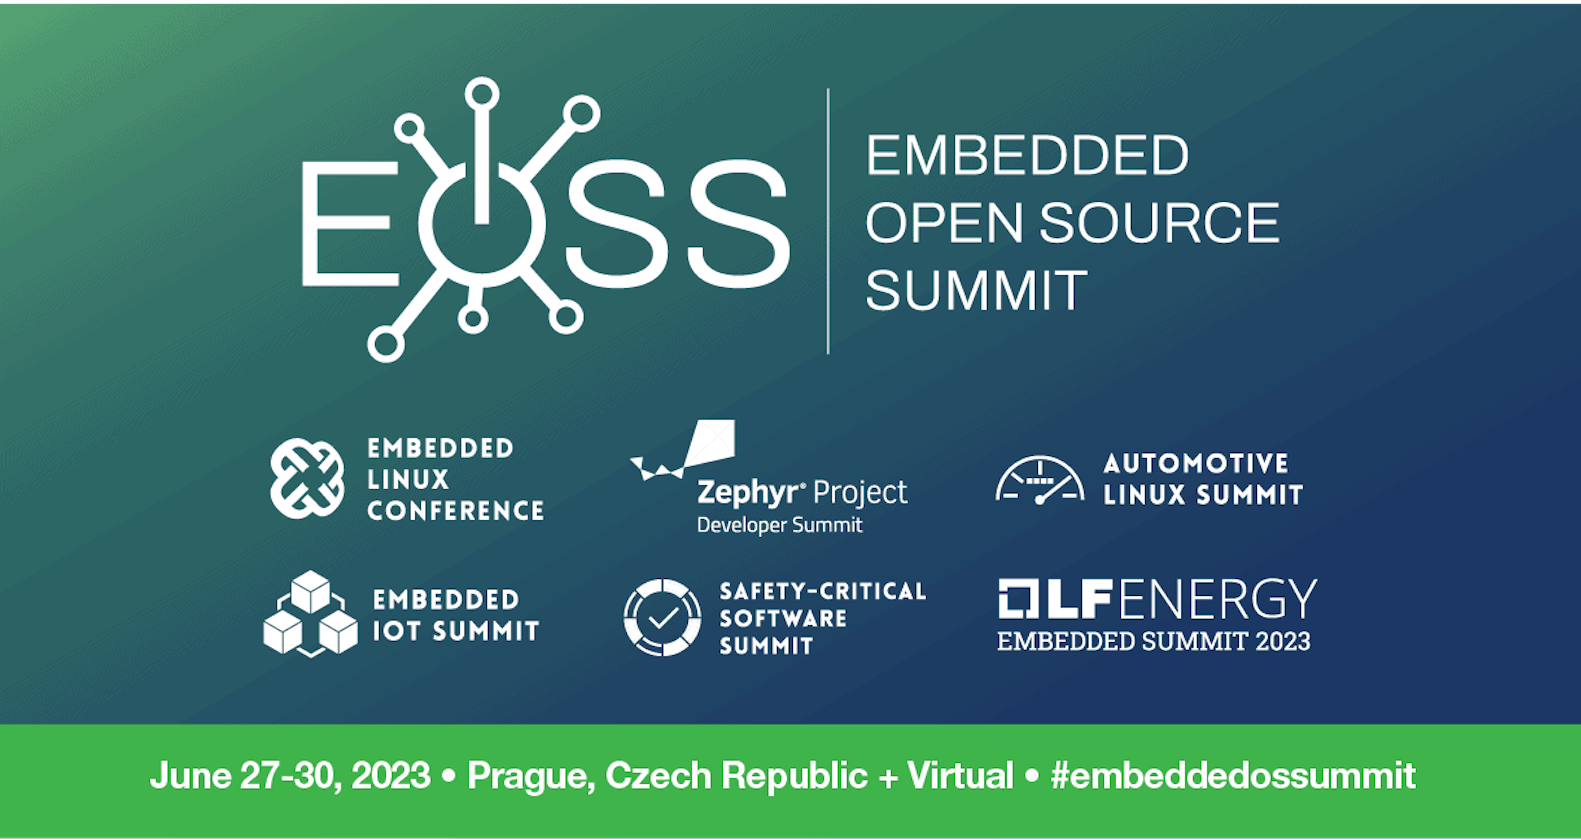 My Embedded Open Source Summit 2023 Experience